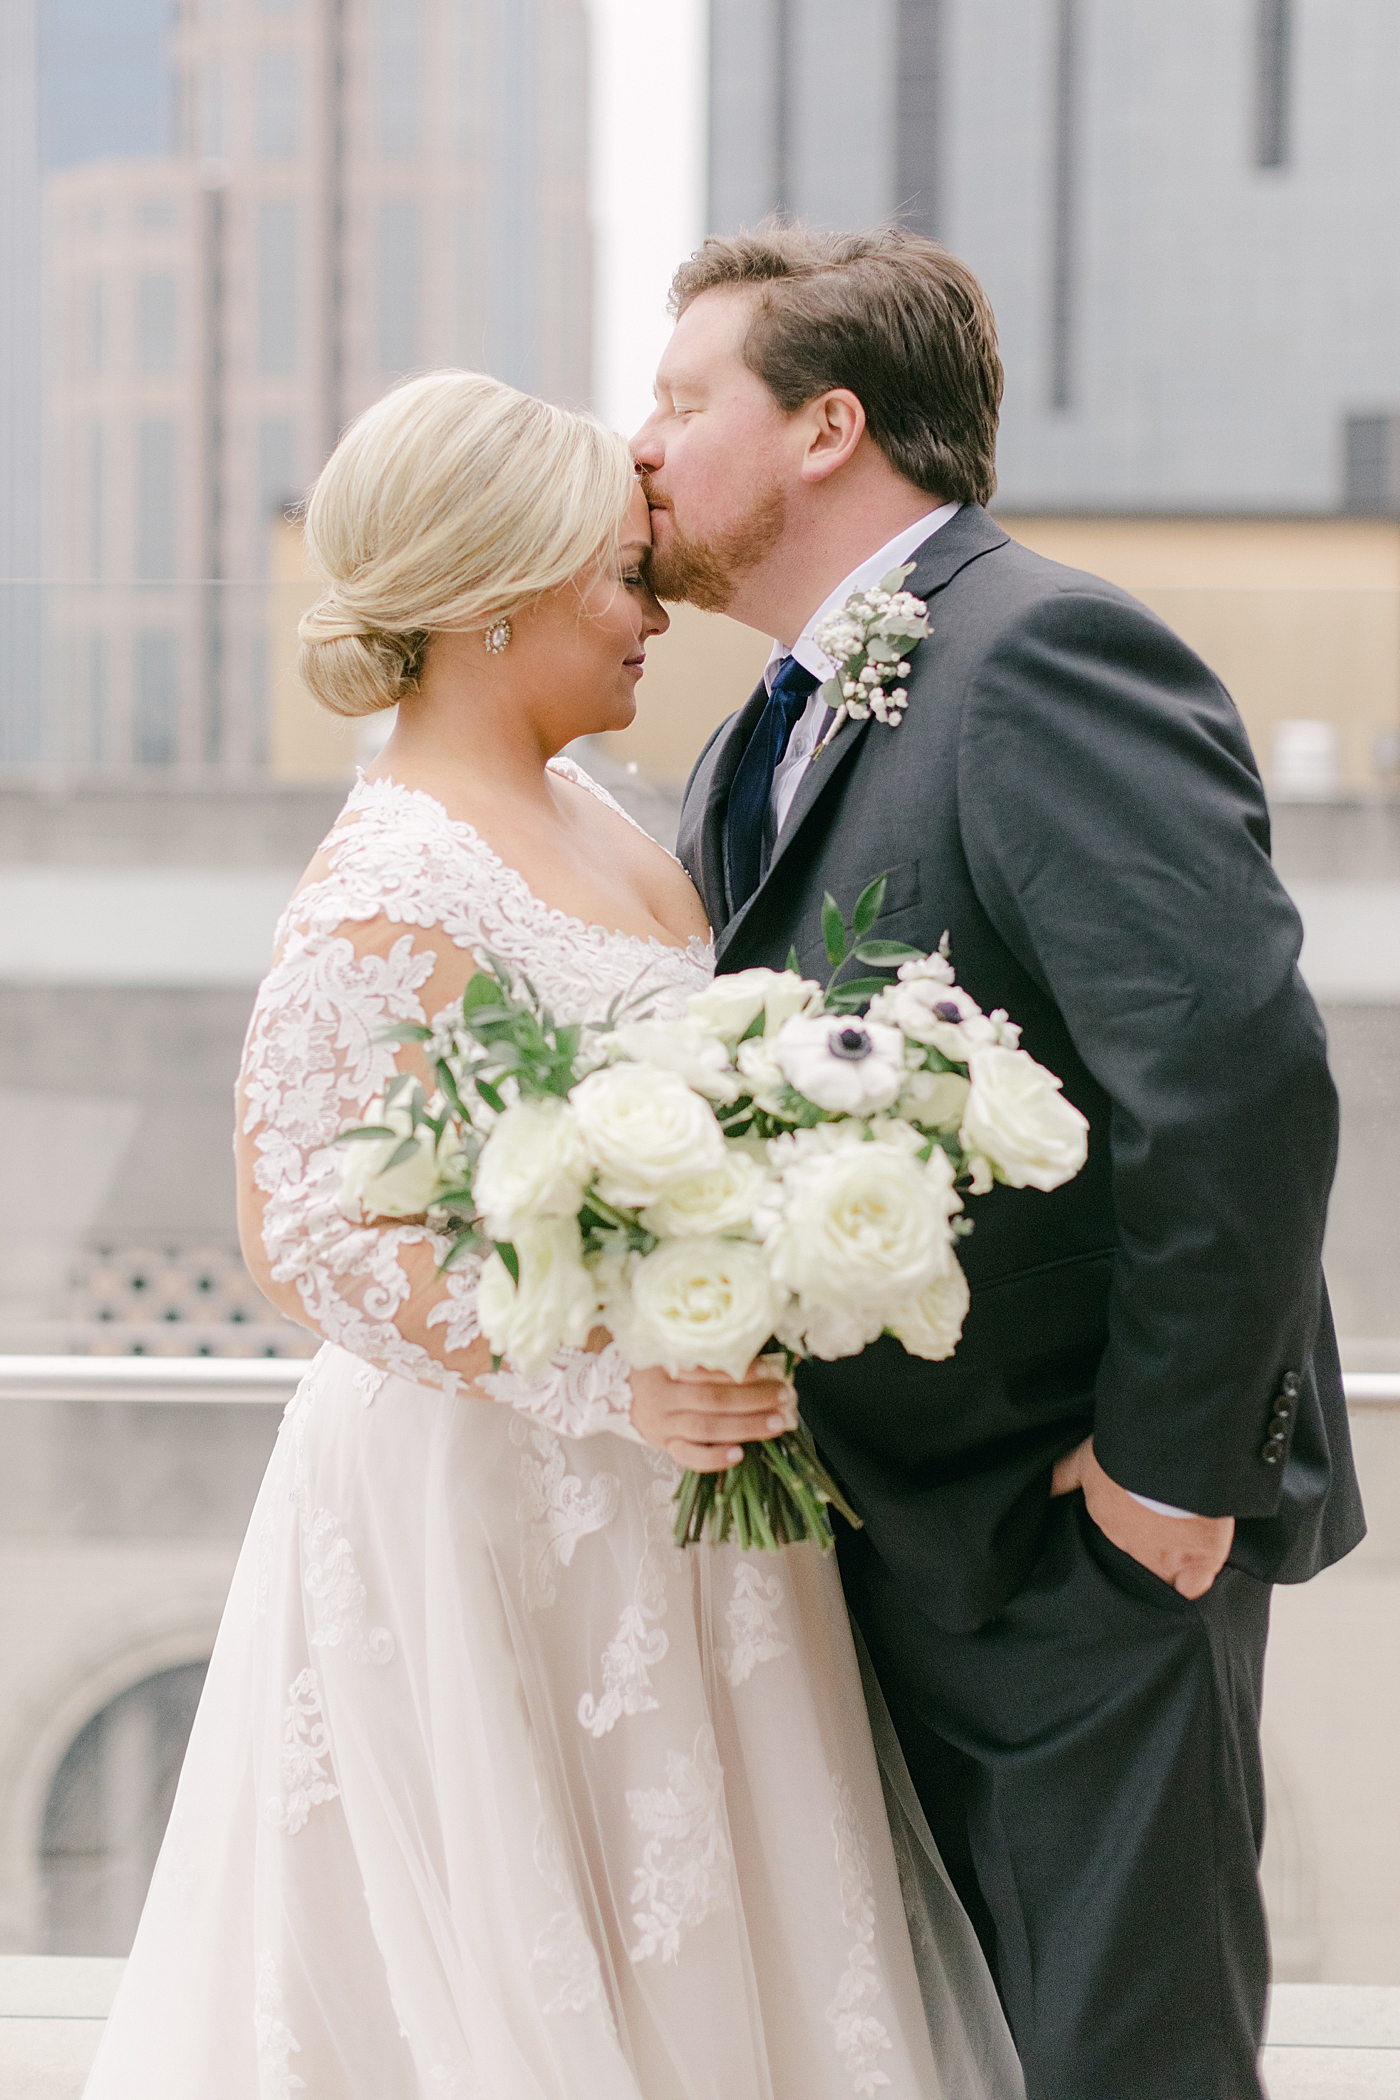 Bride and groom portraits on a rooftop | Photo by Hope Helmuth Photography